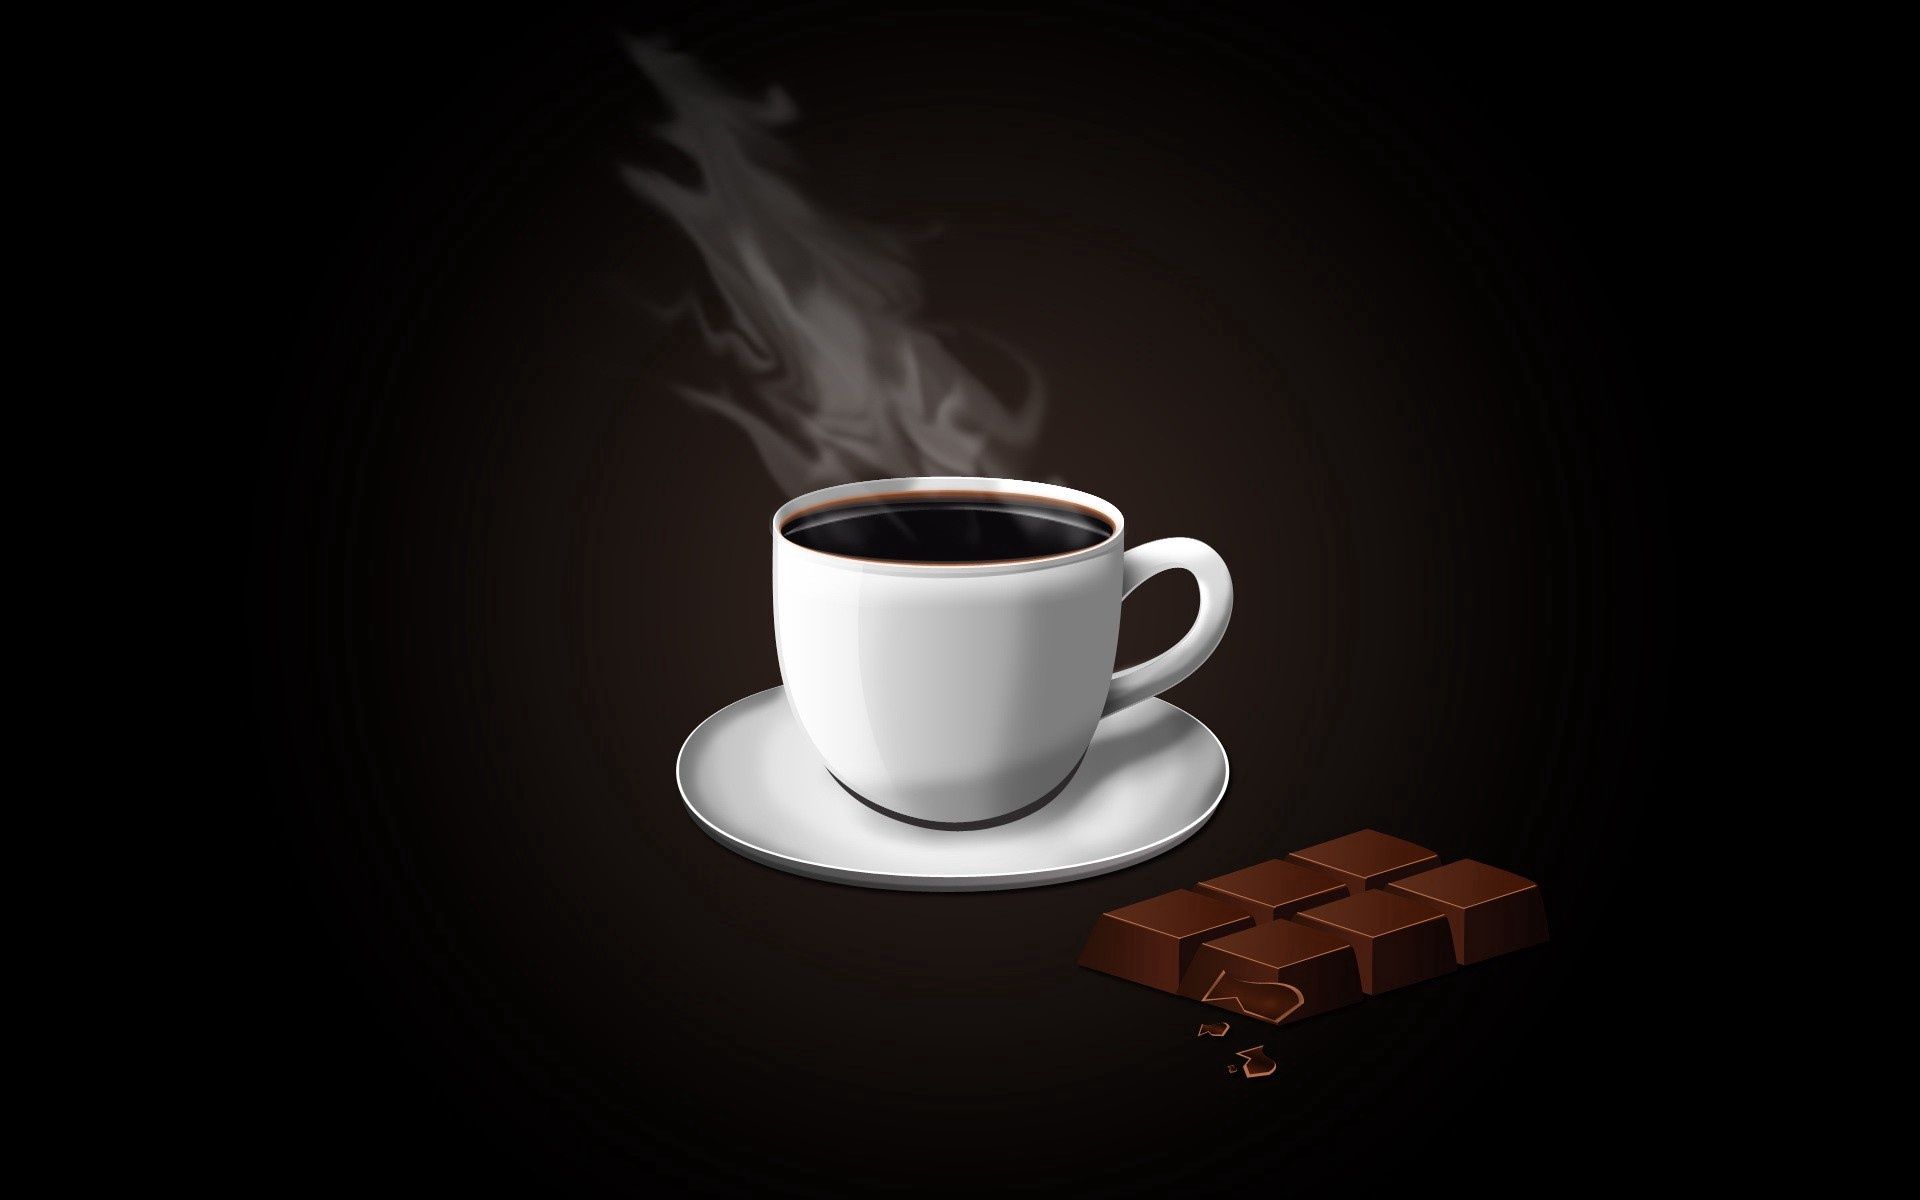 Wallpaper Full HD vector, chocolate, coffee, cup, plate, steam